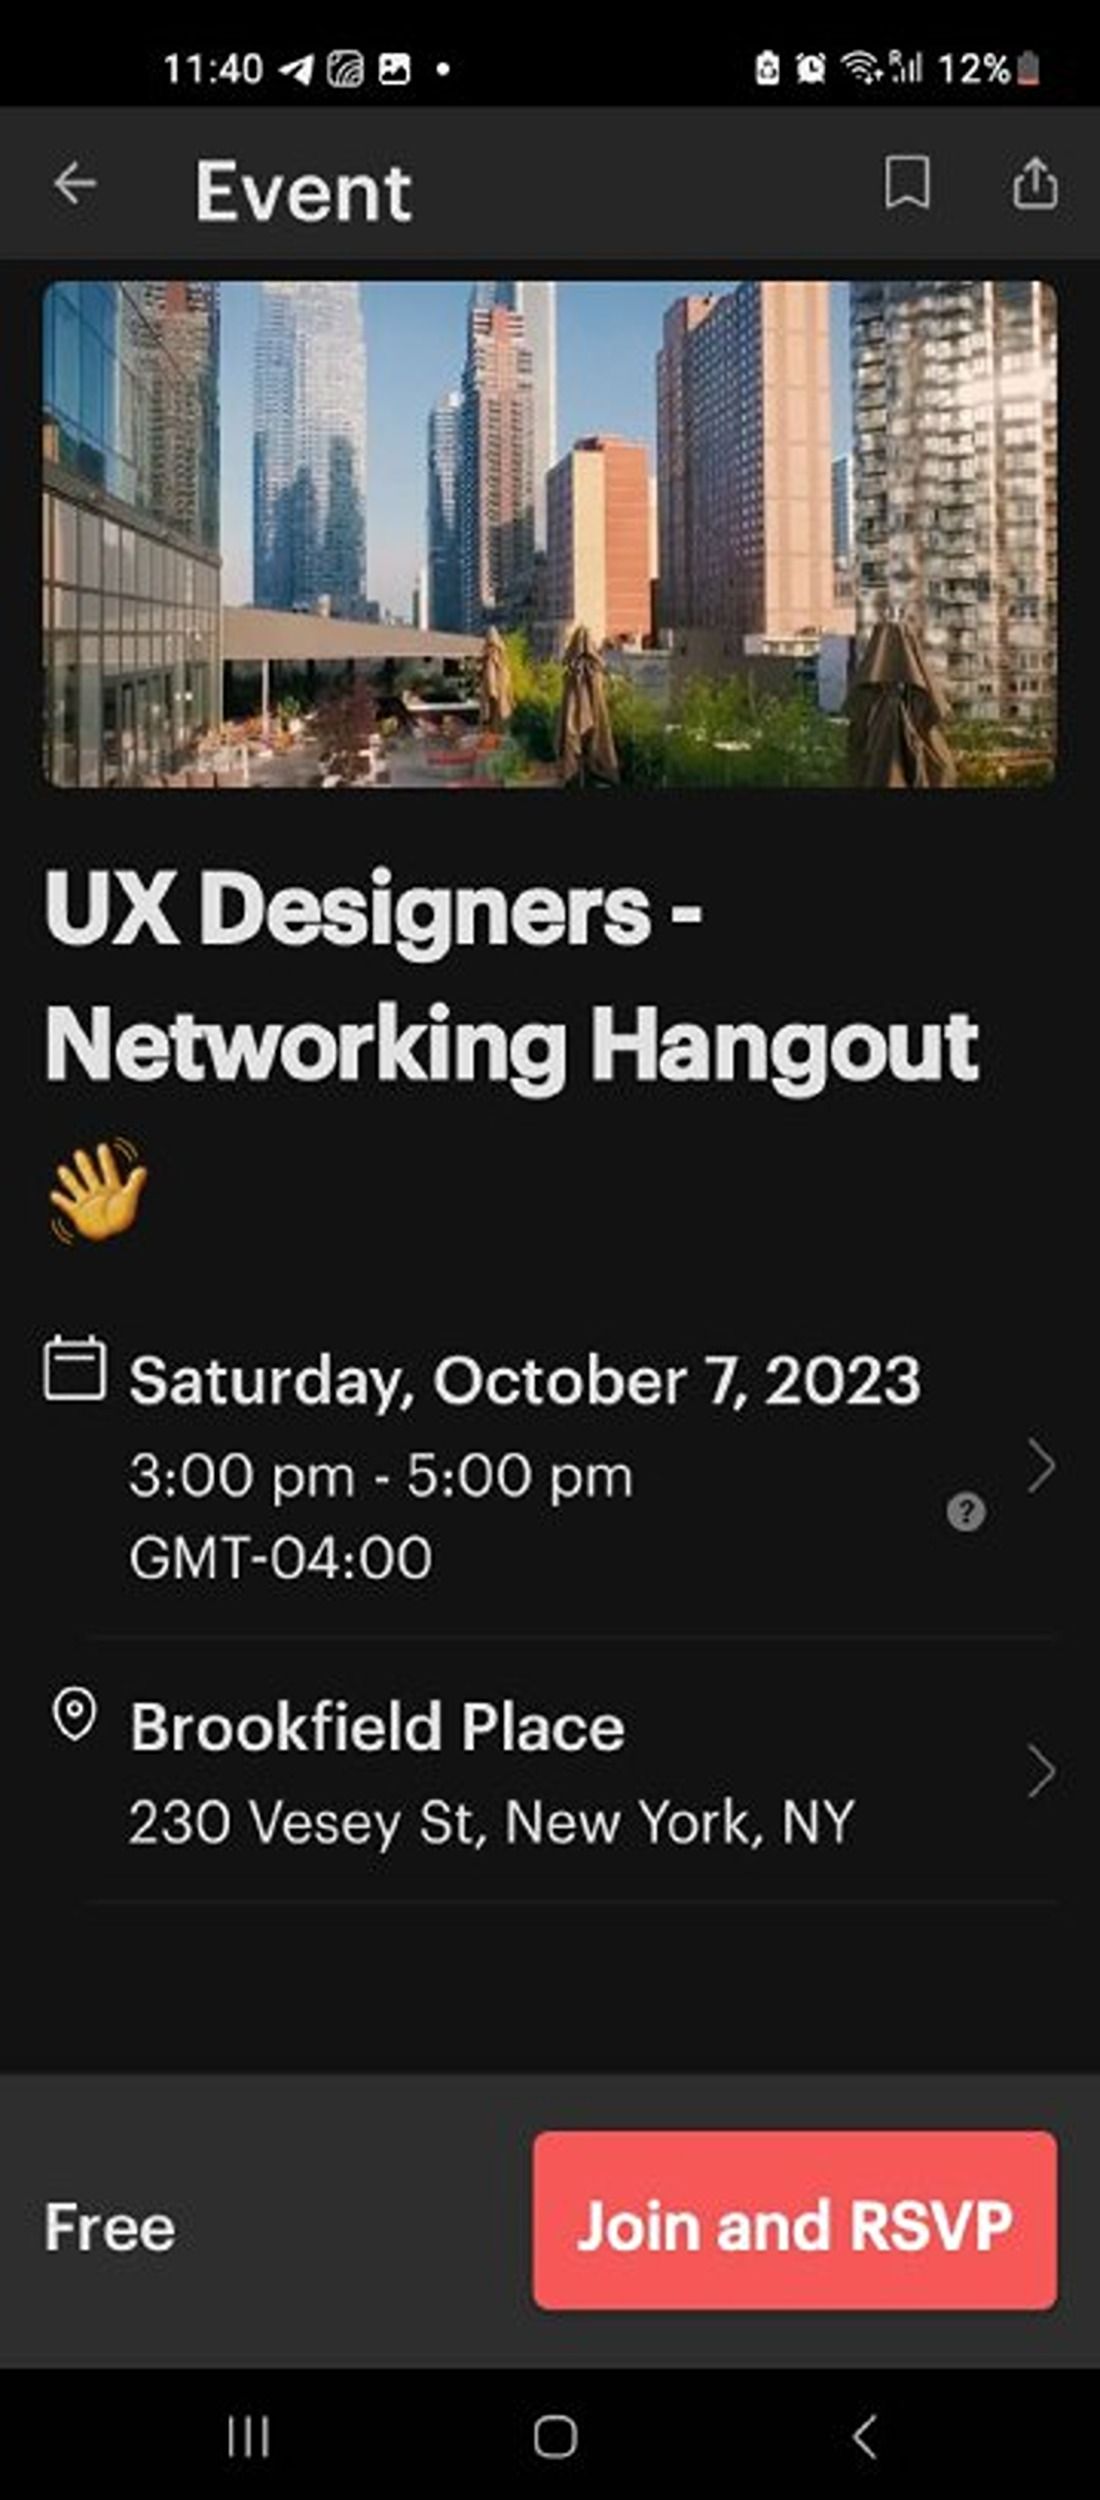 Event details on Meetup